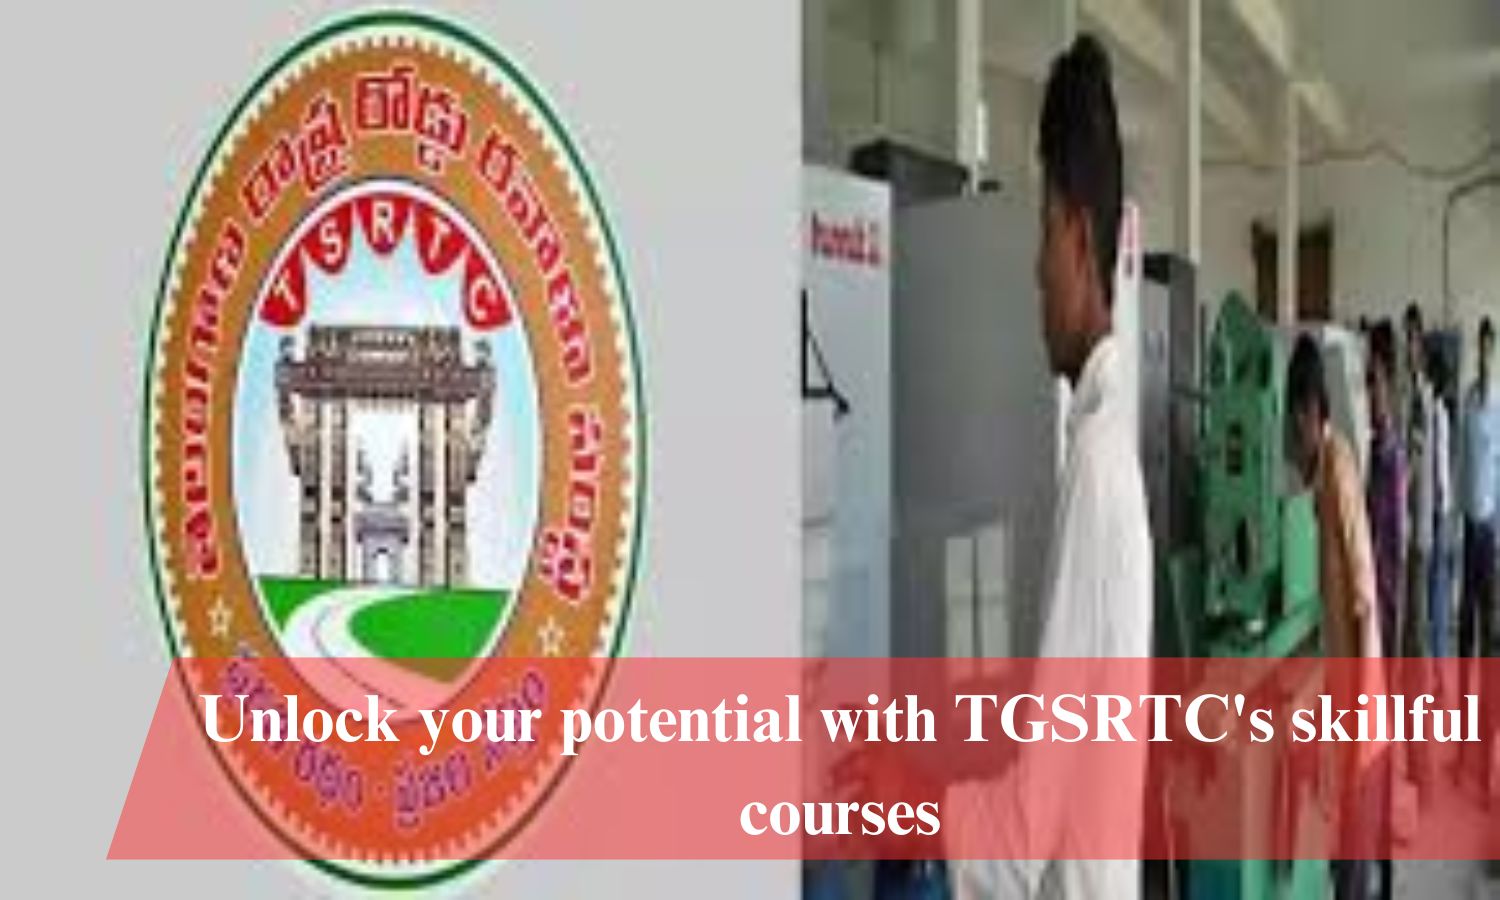 Tgsrtc Training Institute To Offer Skillful Courses To Students.